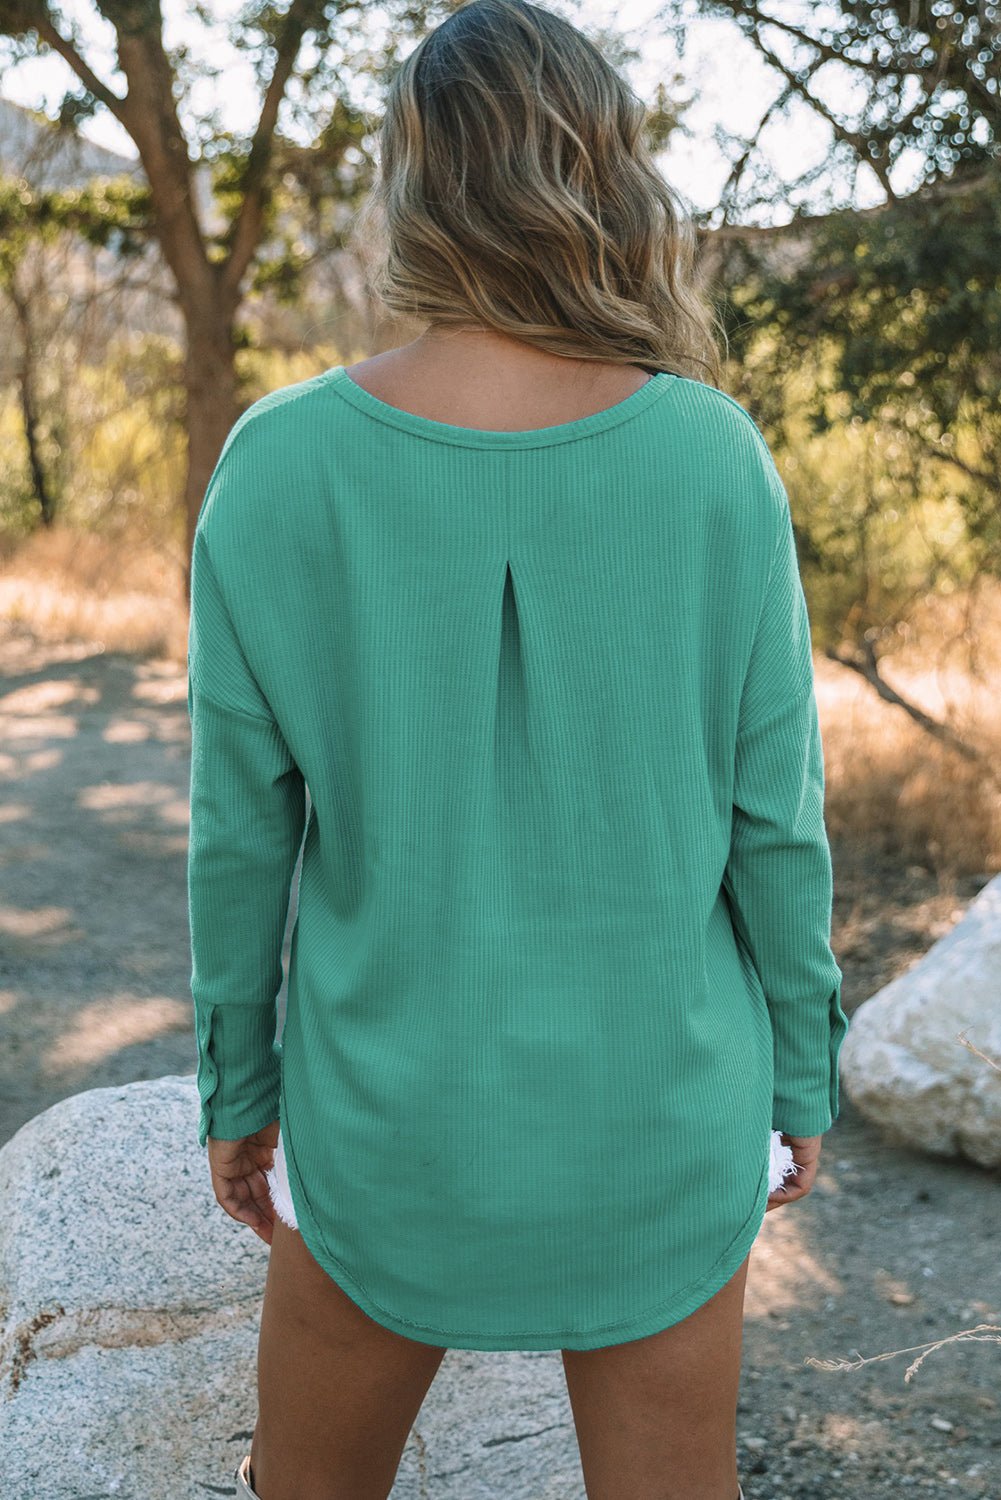 Seam Detail Curved Hem Long Sleeve Top - Fashion Girl Online Store